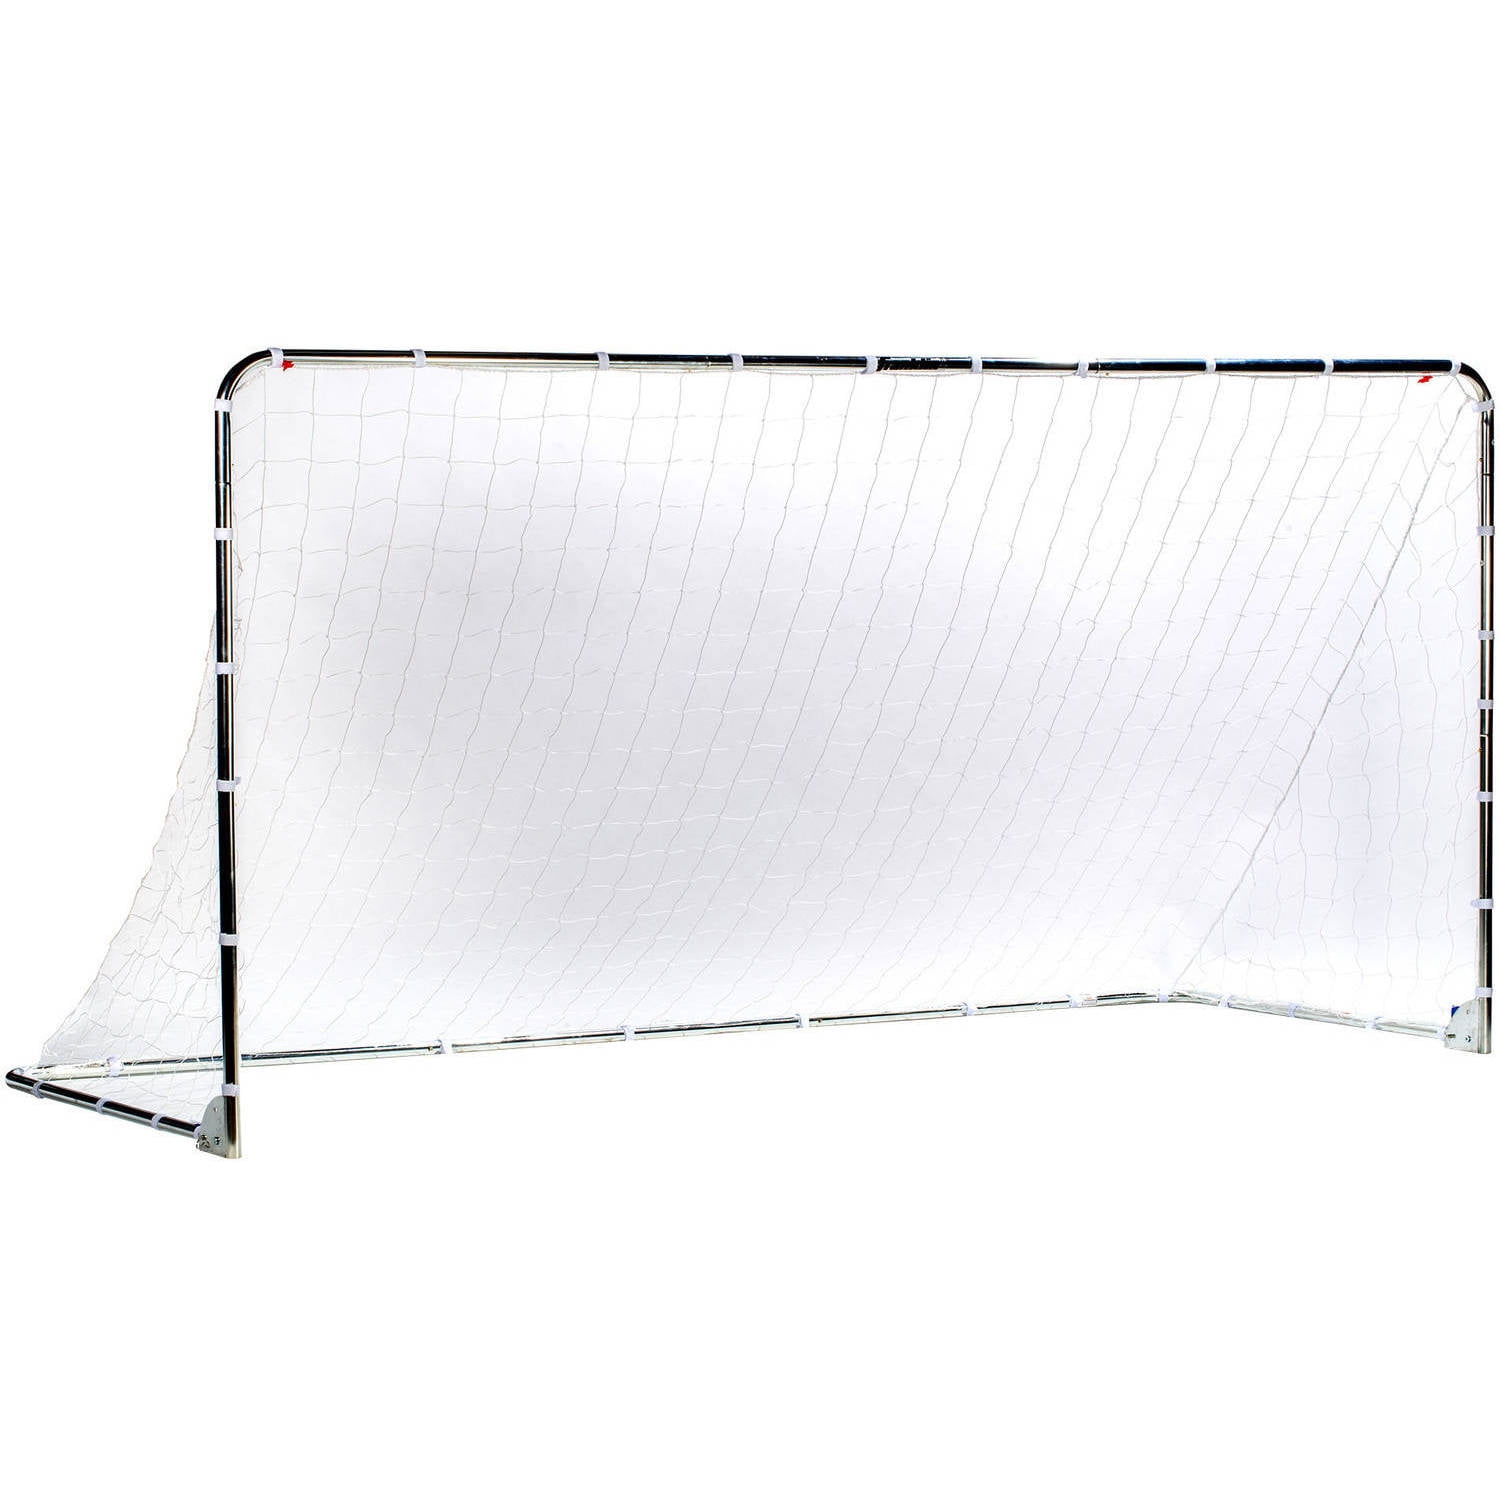 Franklin Sports Competition Soccer Goal 